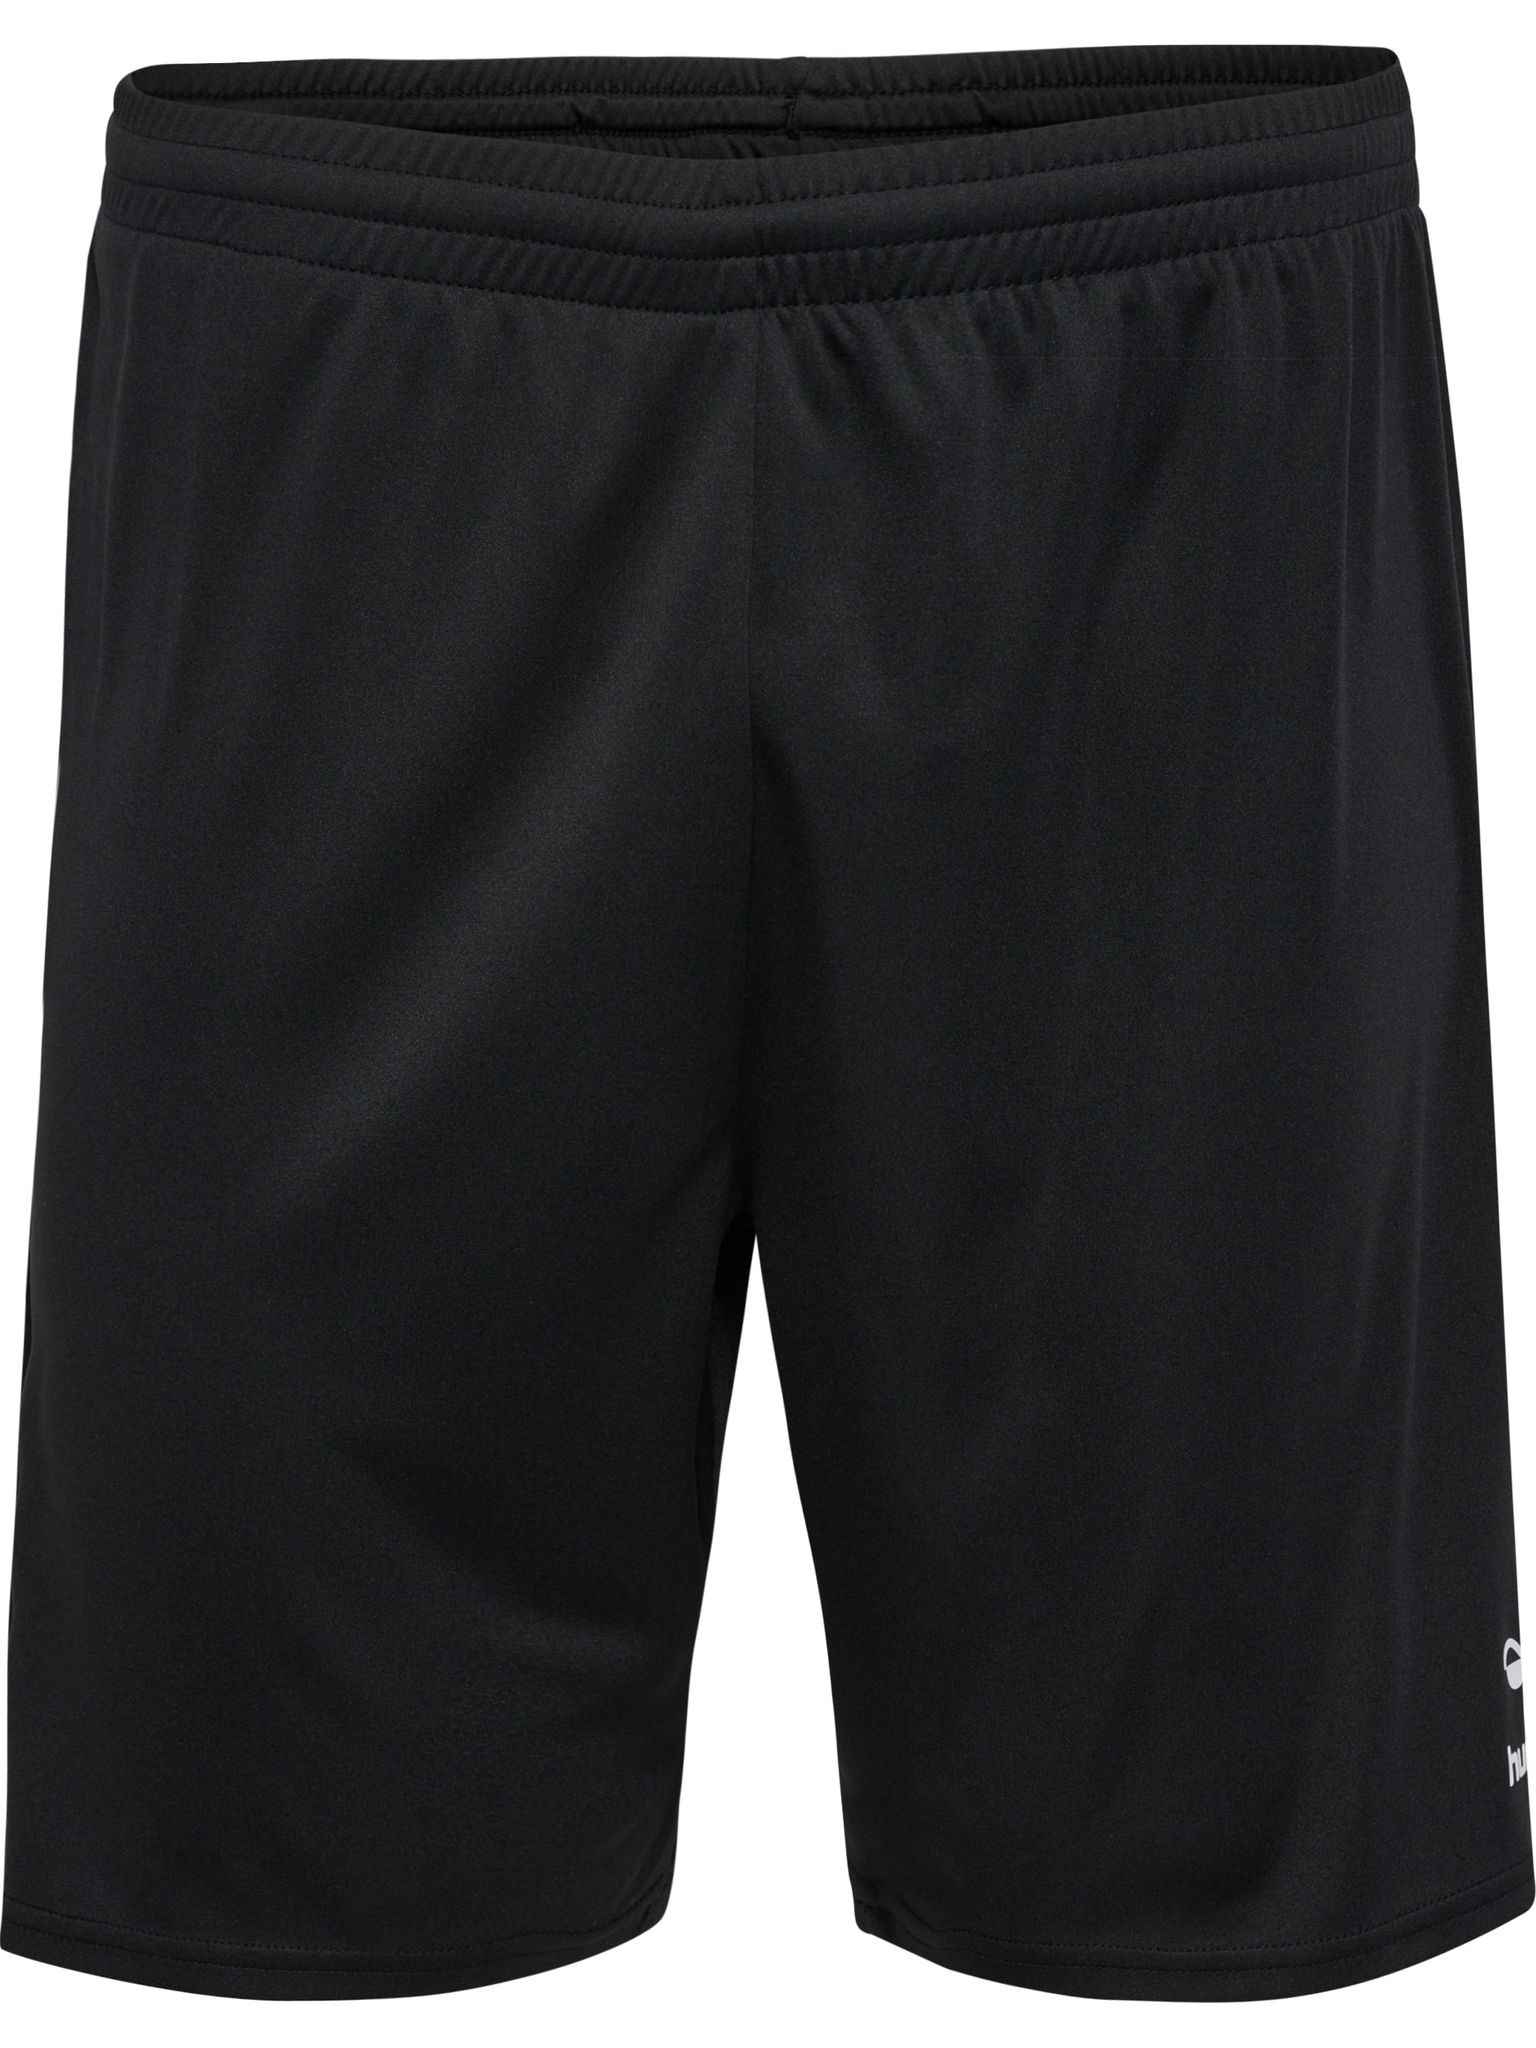 hmlESSENTIAL SHORTS